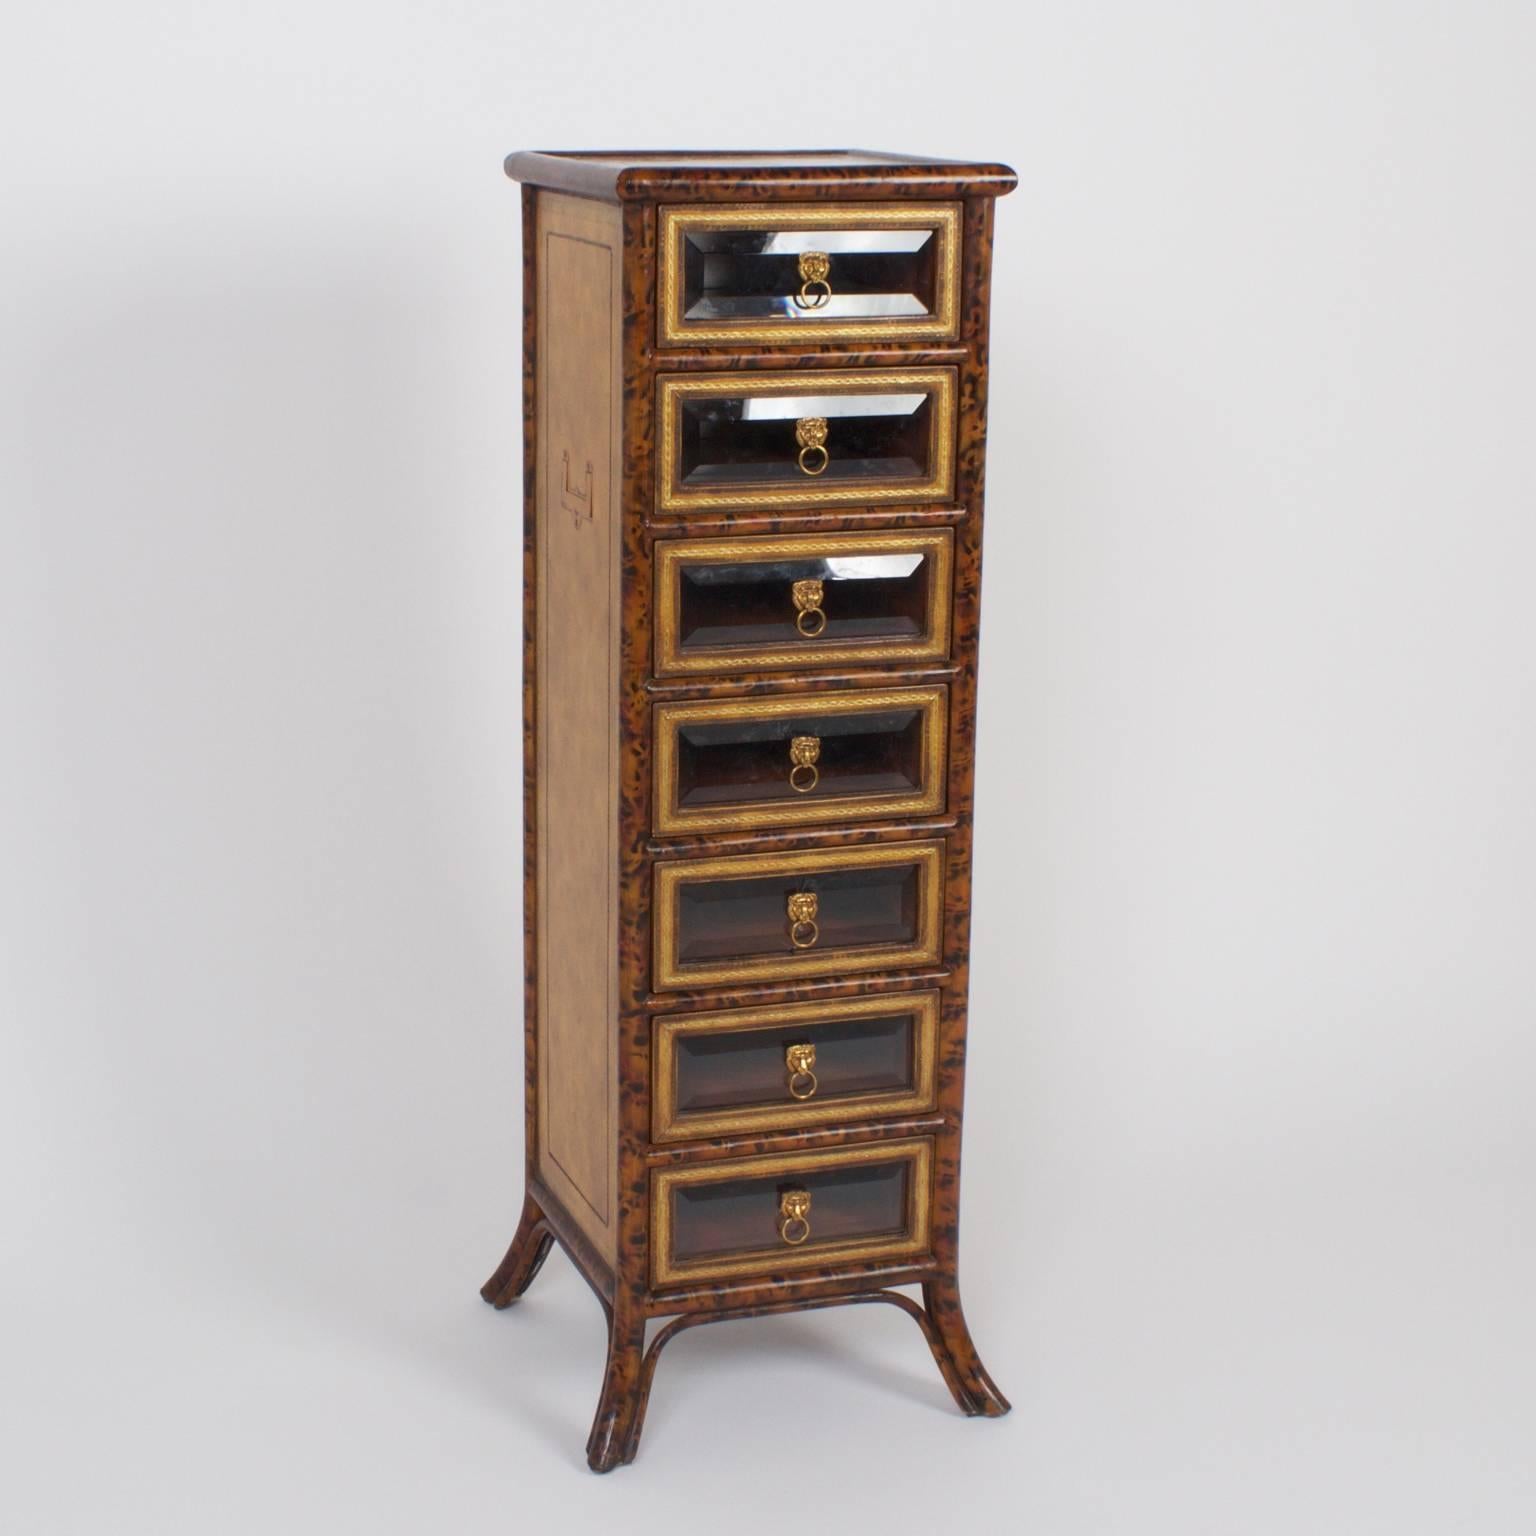 Tall, stately seven-drawer chest with a faux bamboo frame painted with a tortoiseshell technique, and paneled sides with tooled leather and inset campaign style hardware. The drawers have tooled leather borders with beveled glass and lion head brass